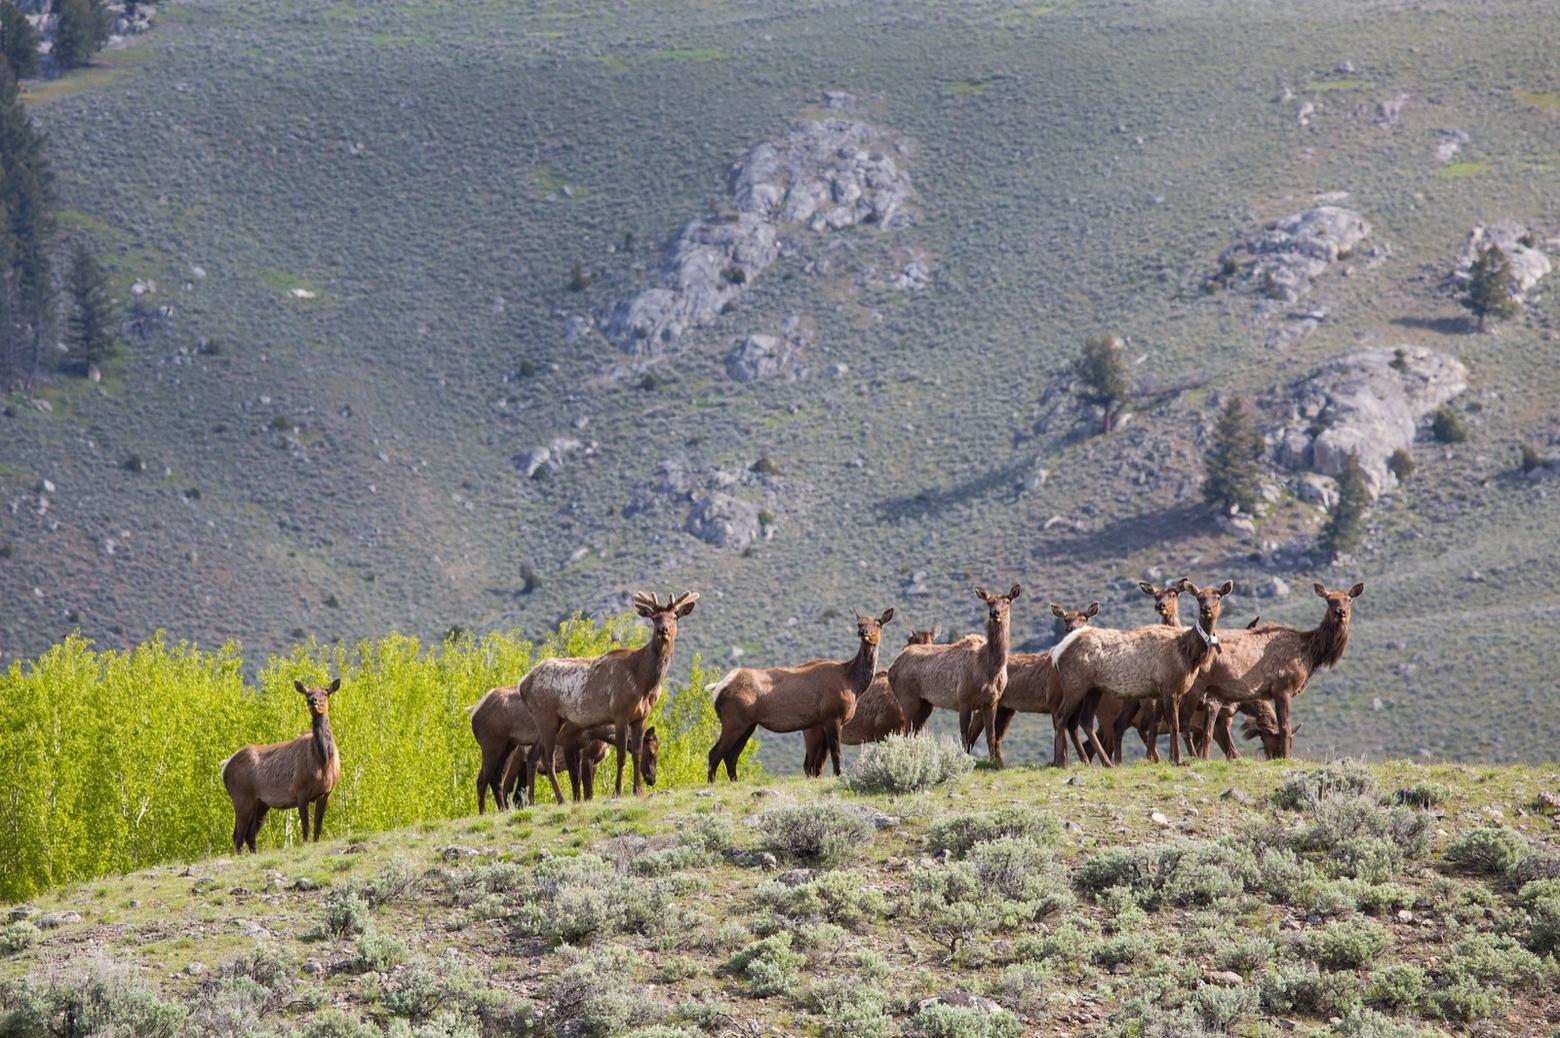 A band of cow elk in the Lamar Valley, cornerstone of Yellowstone's Northern Range and home to one of the most famous elk herds in North America. Photo courtesy Neal Herbert/NPS